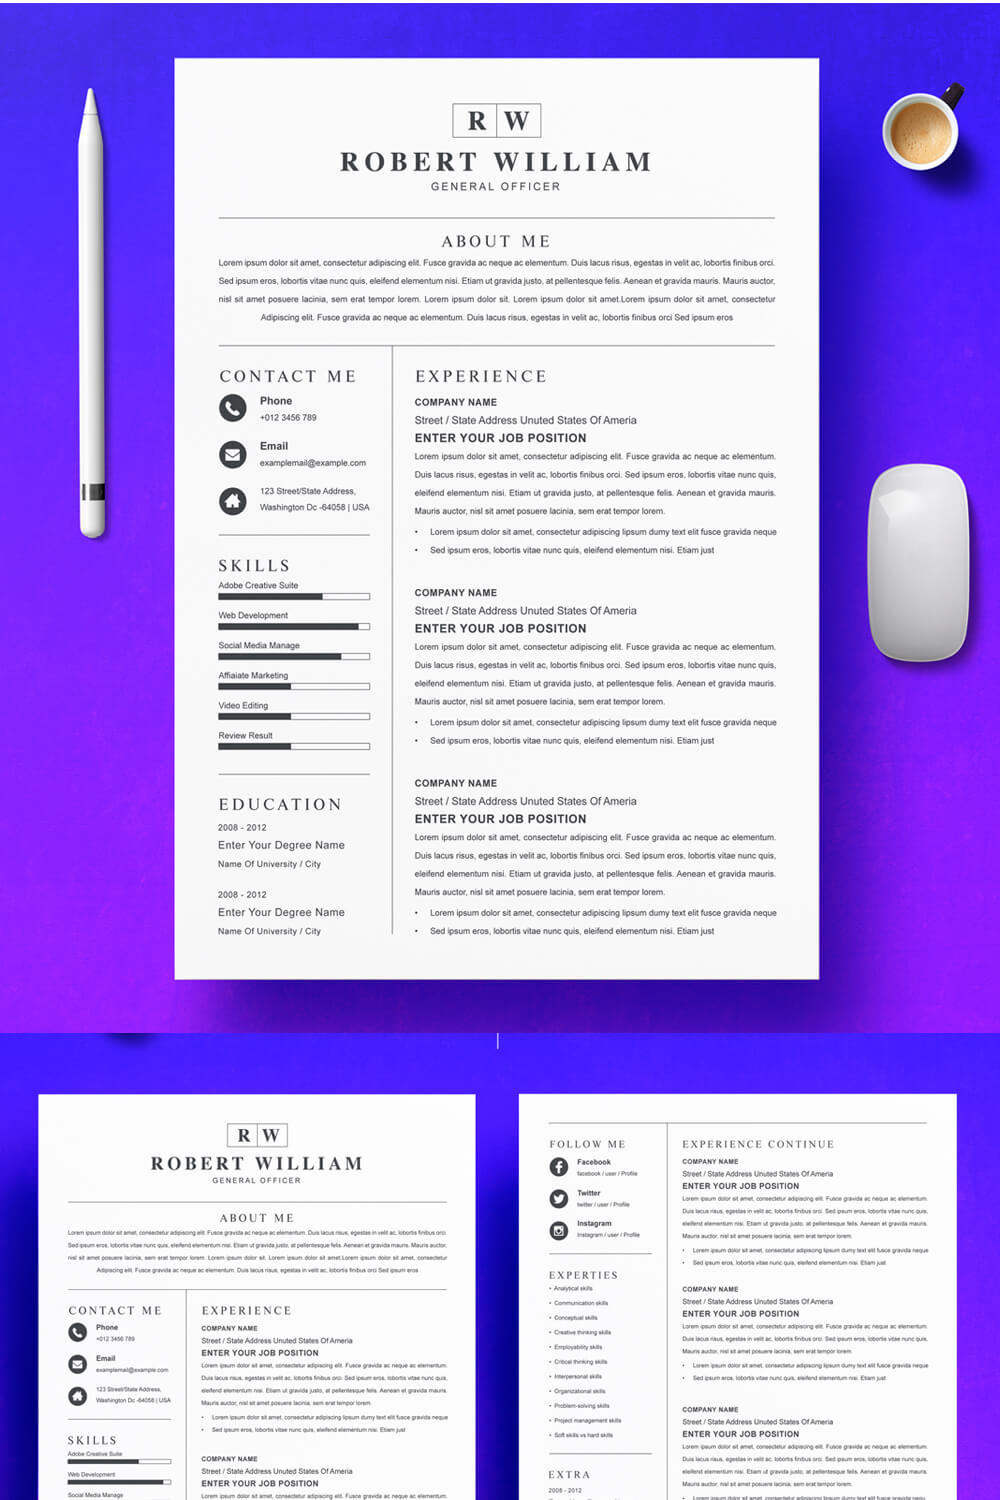 General Officer Clean & Professional Resume Template | Modern CV Template Design pinterest preview image.